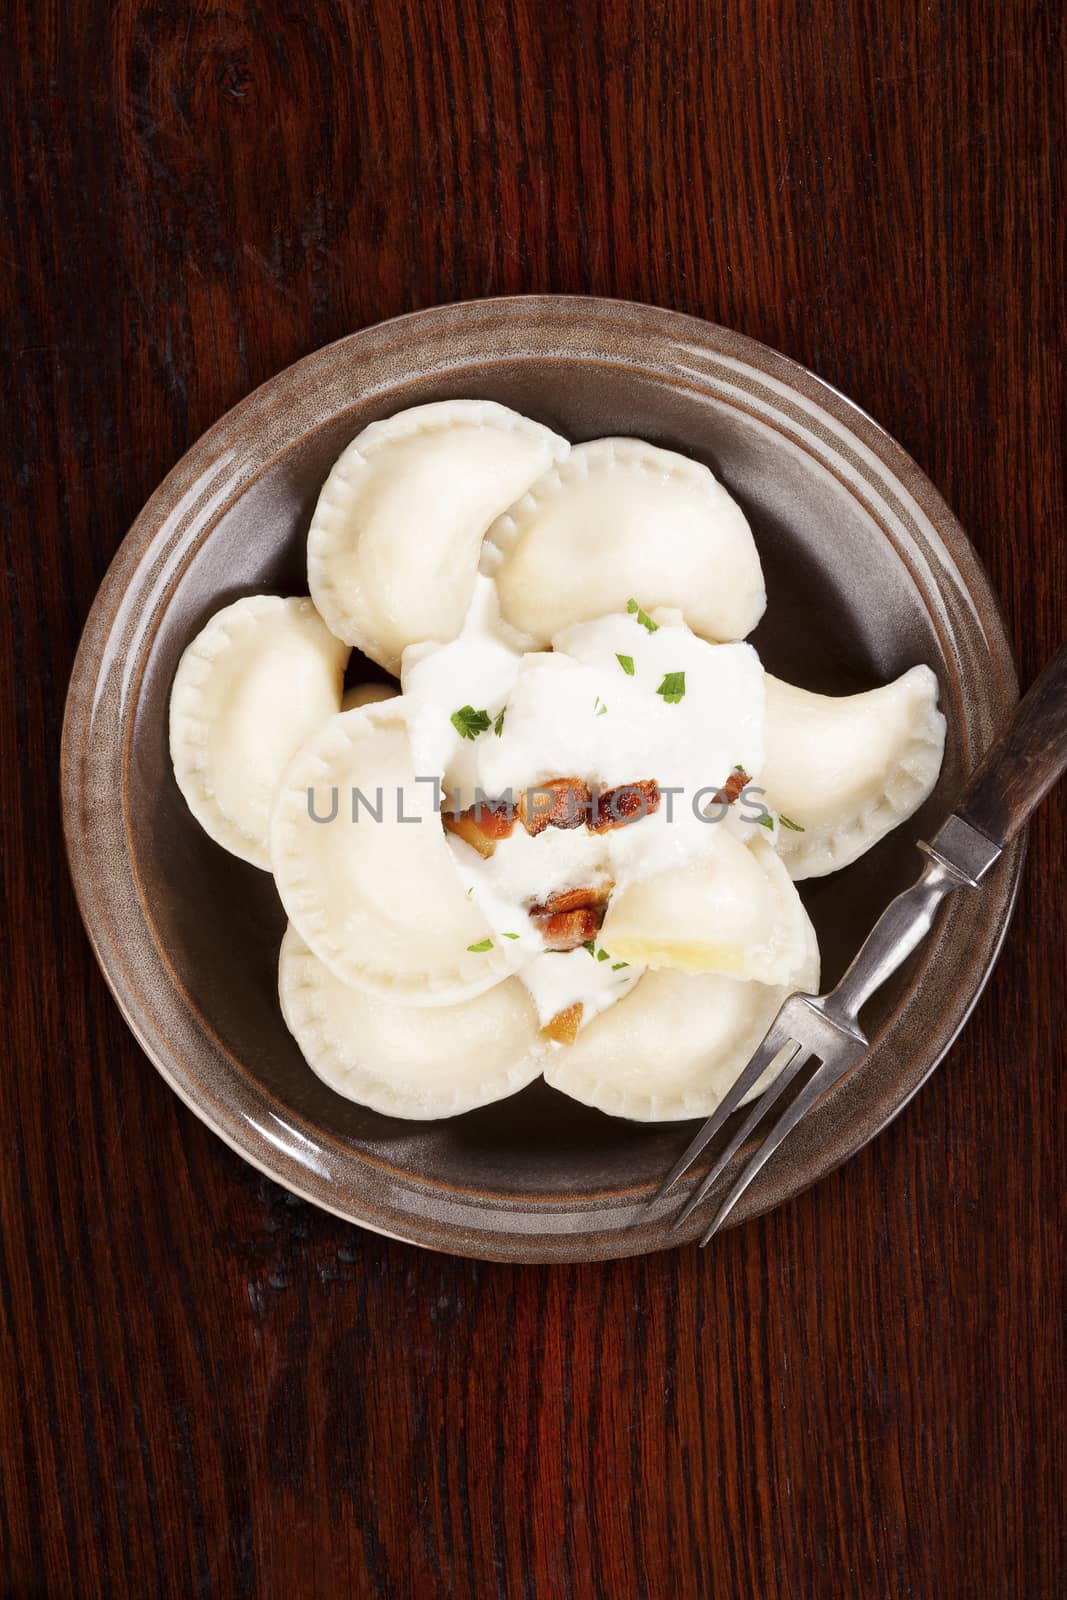 Bryndzove pirohy. Dumplings with sheep cheese bryndza on brown plate on brown wooden background. Traditional slovak food.